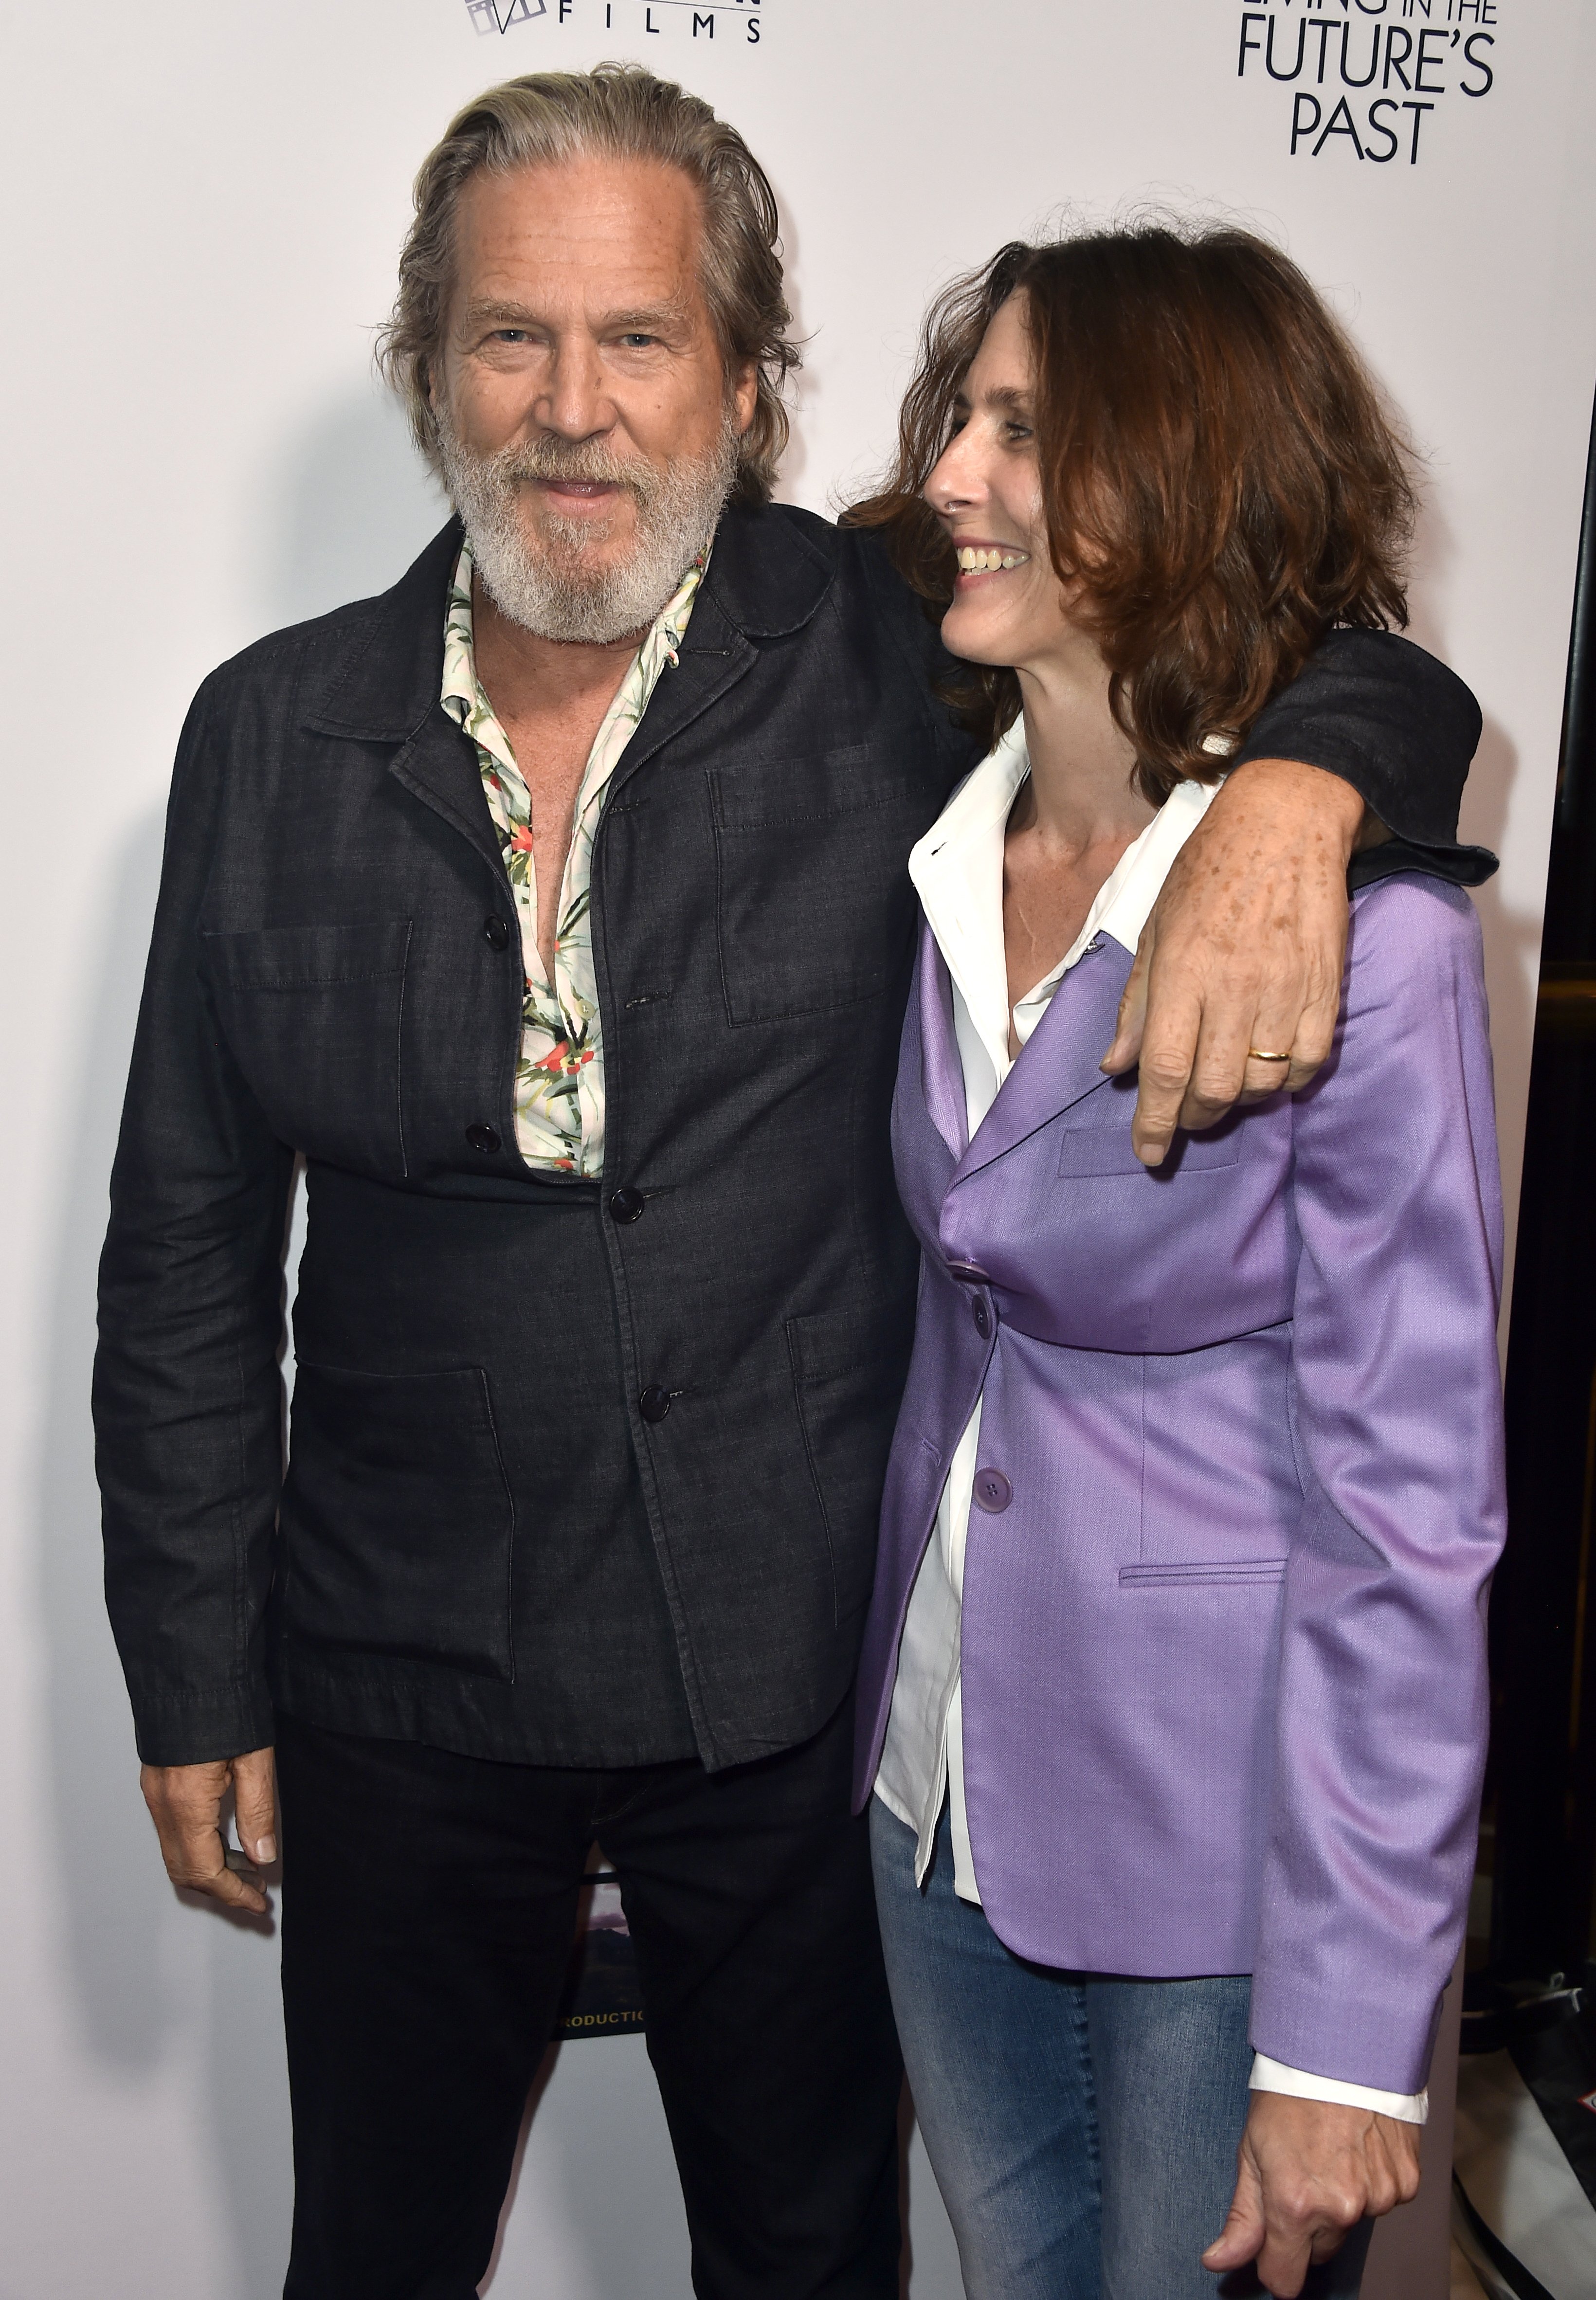 Jeff Bridges and director Susan Kucera attend the Premiere Of Vision Films' "Living In The Future's Past" at Ahrya Fine Arts Theater on October 2, 2018 in Beverly Hills, California. | Source: Getty Images